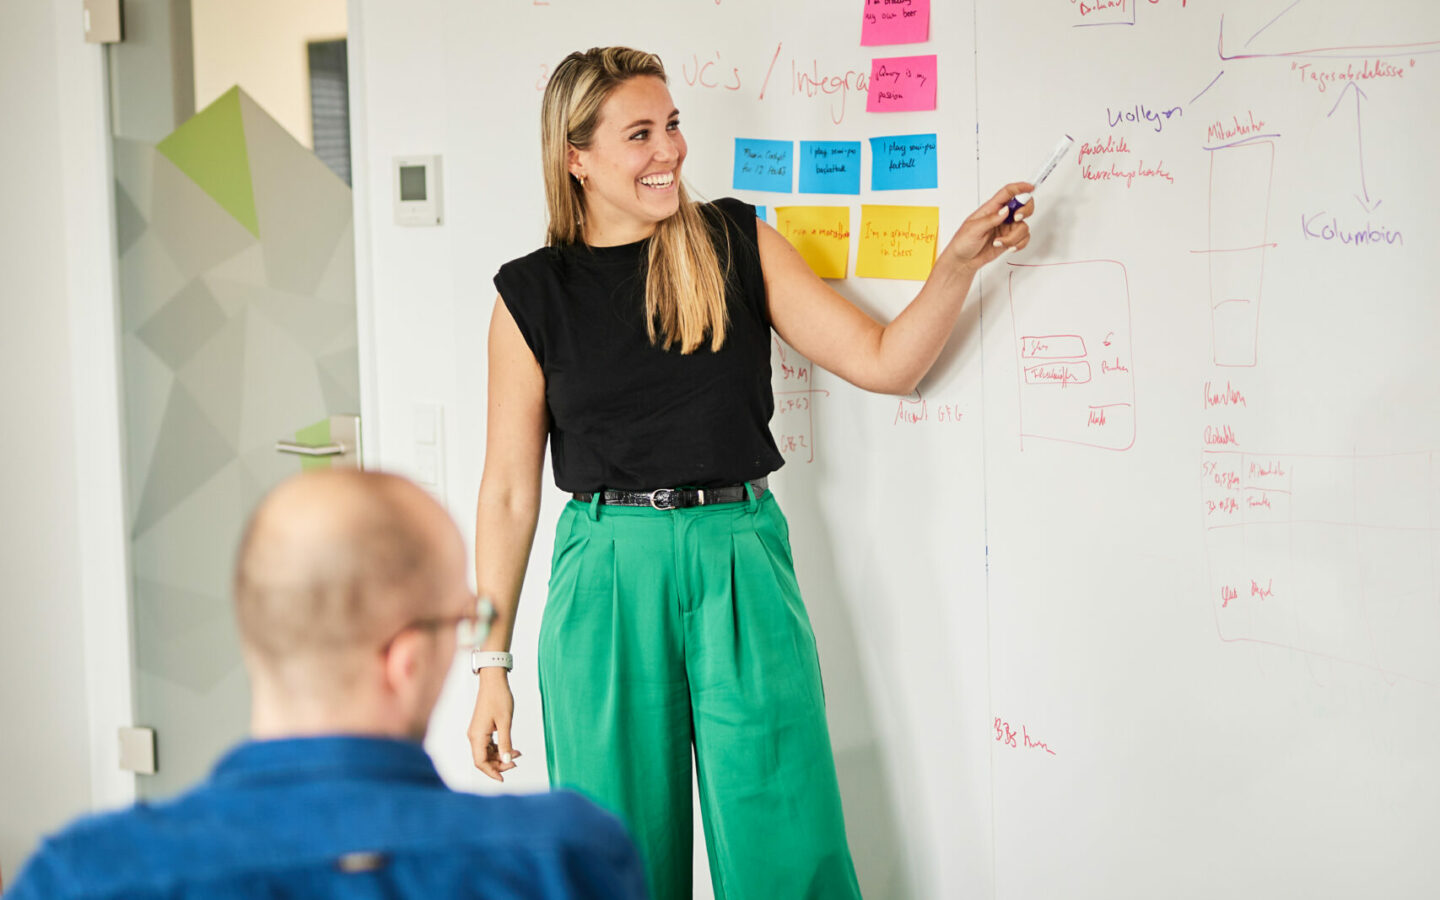 Photo of a woman standing at a whiteboard explaining a new strategy to her colleagues.